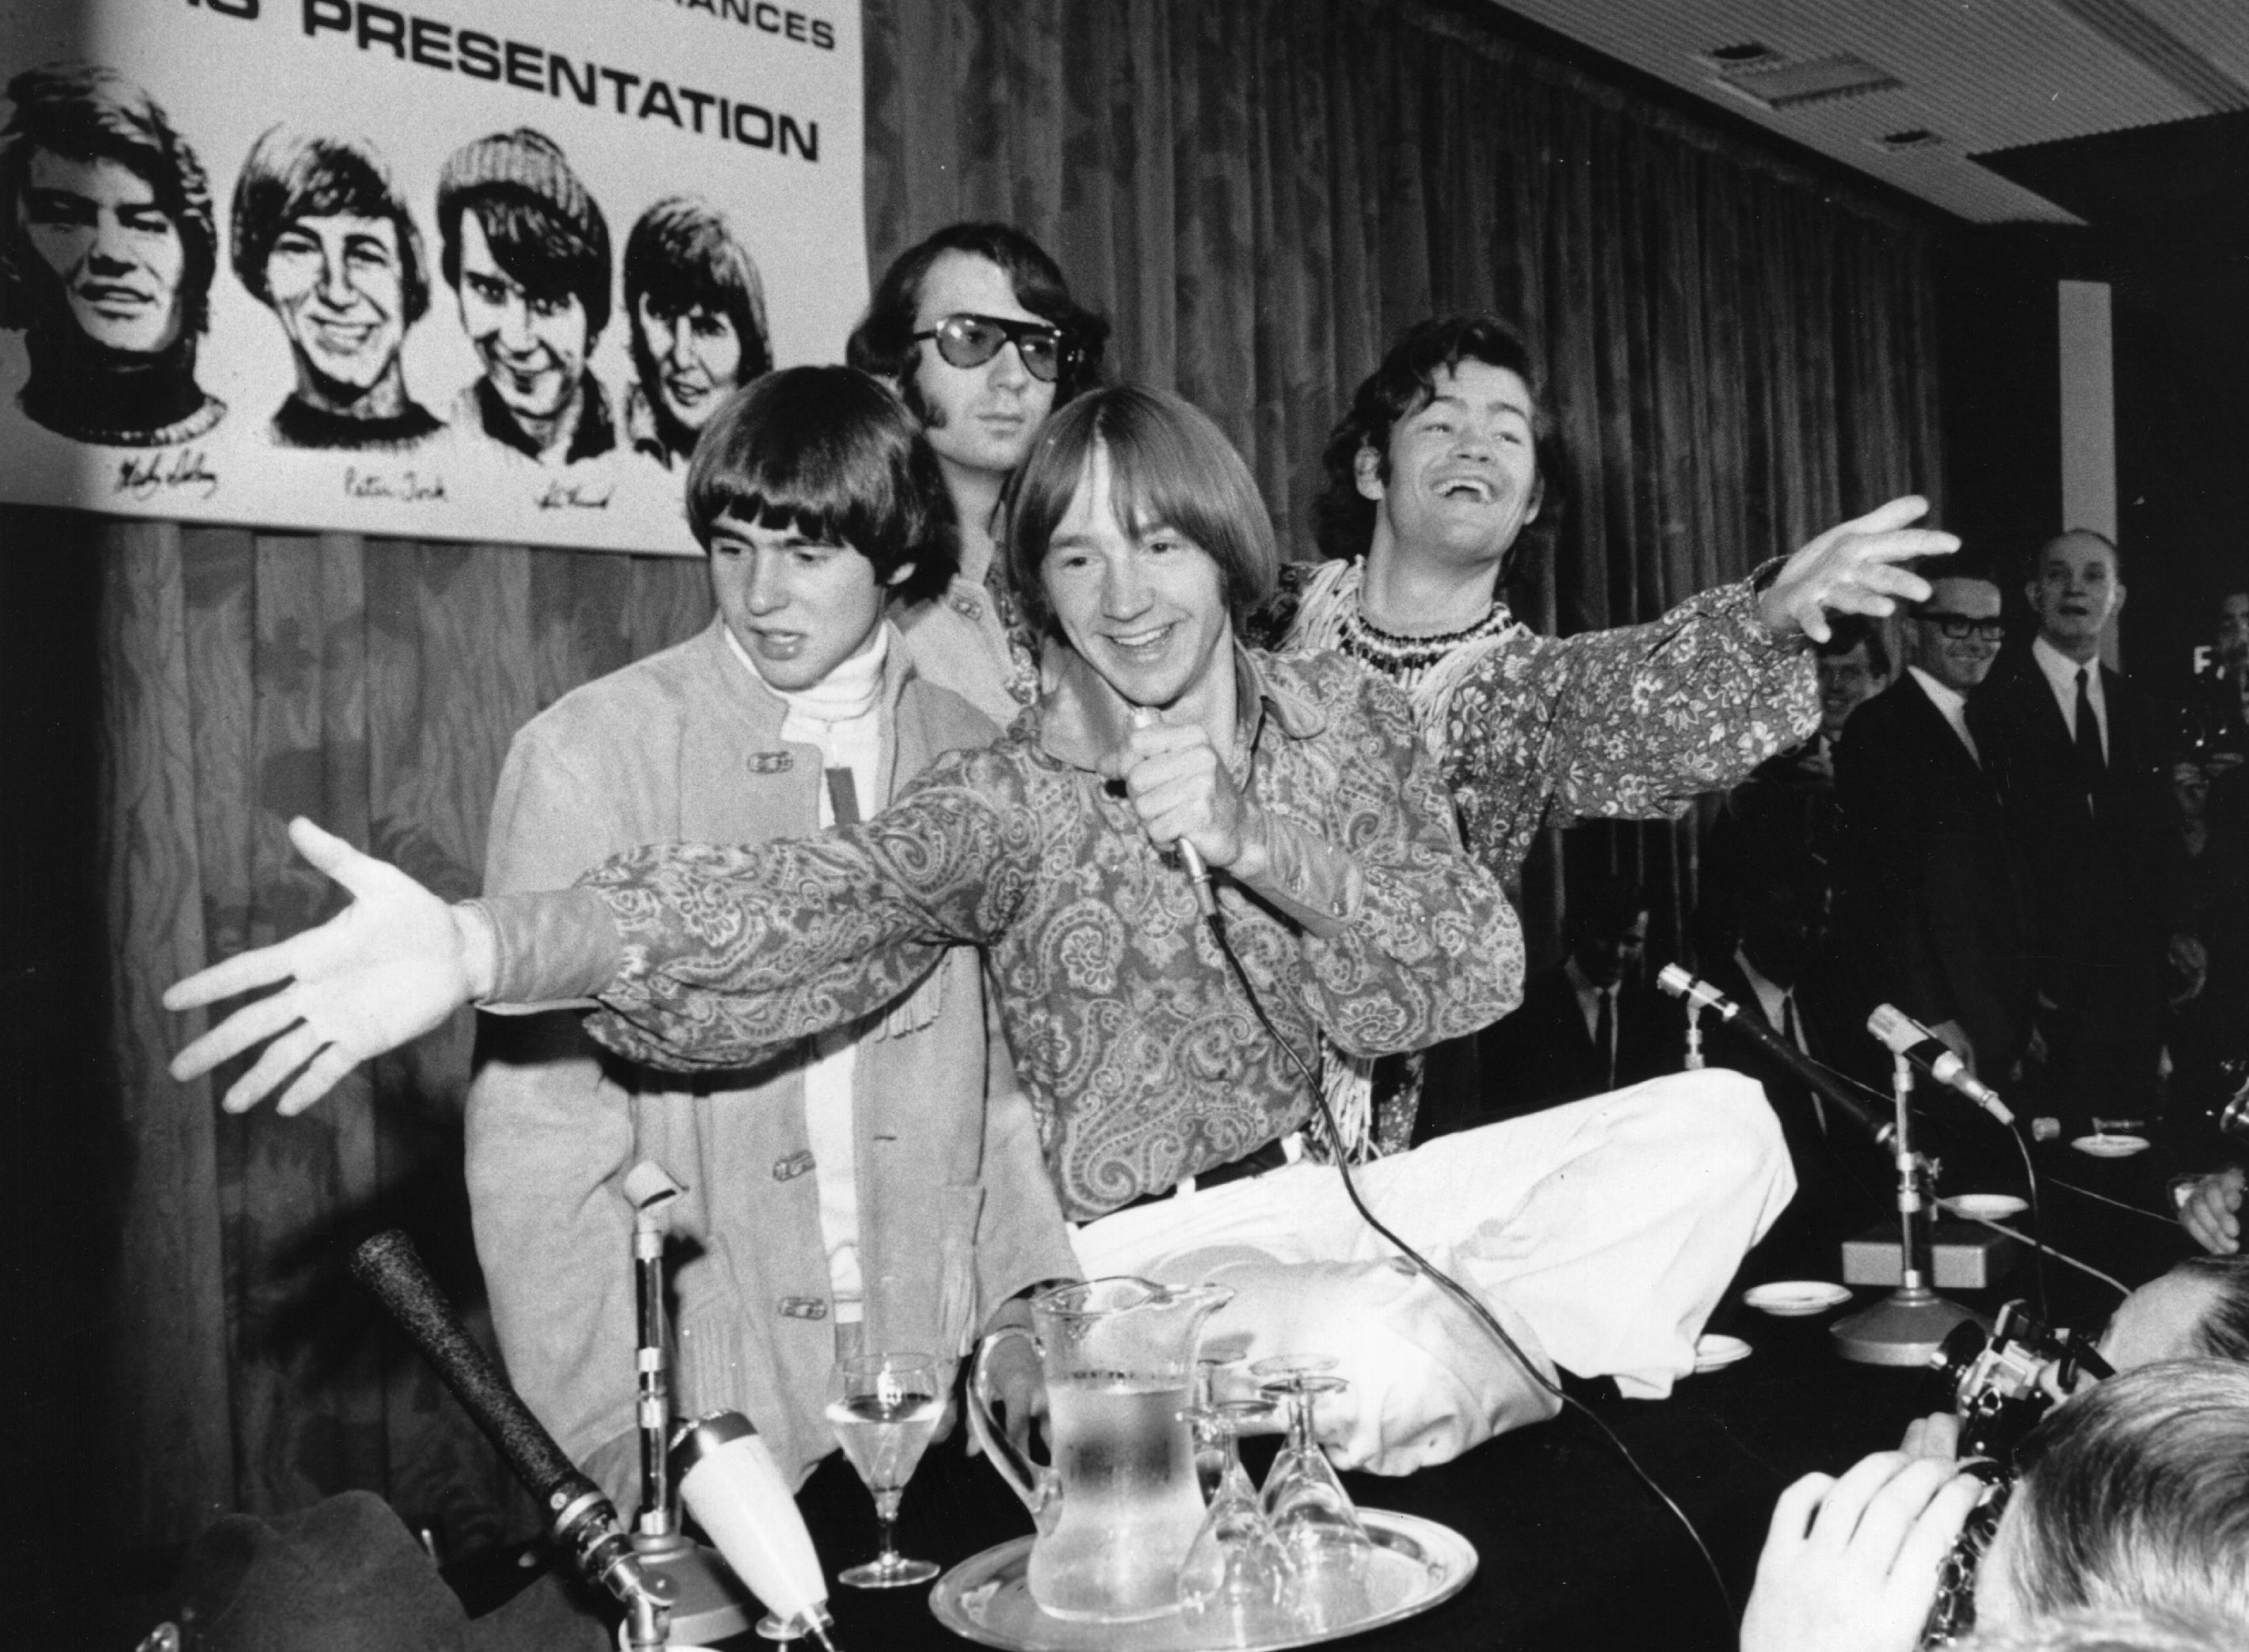 The Monkees in front of a poster of The Monkees